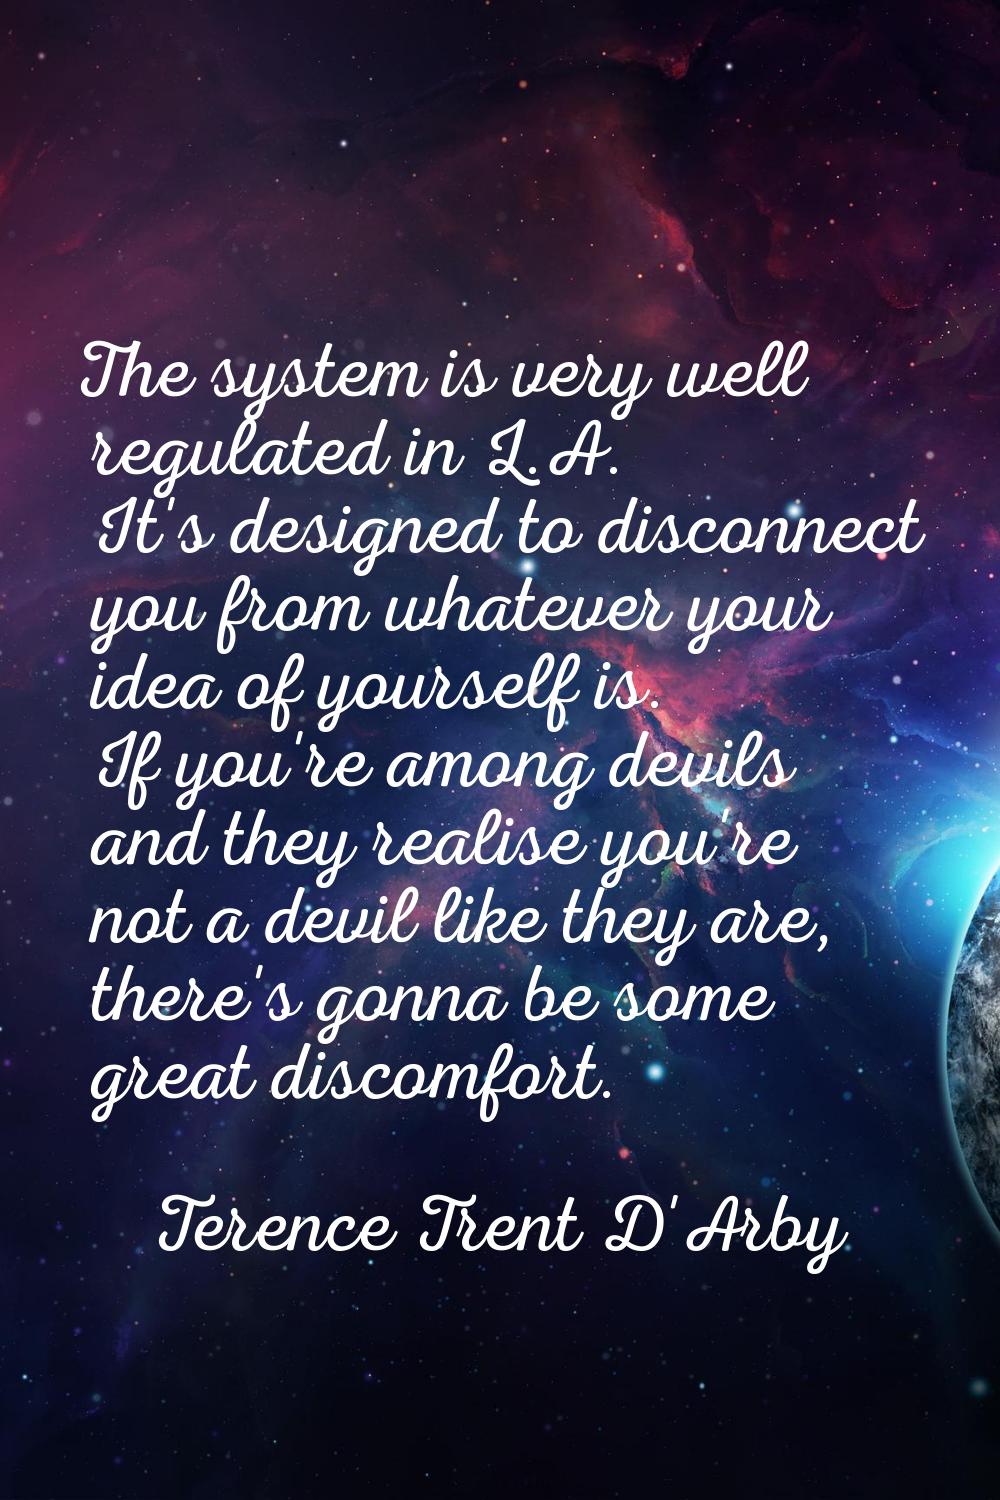 The system is very well regulated in L.A. It's designed to disconnect you from whatever your idea o